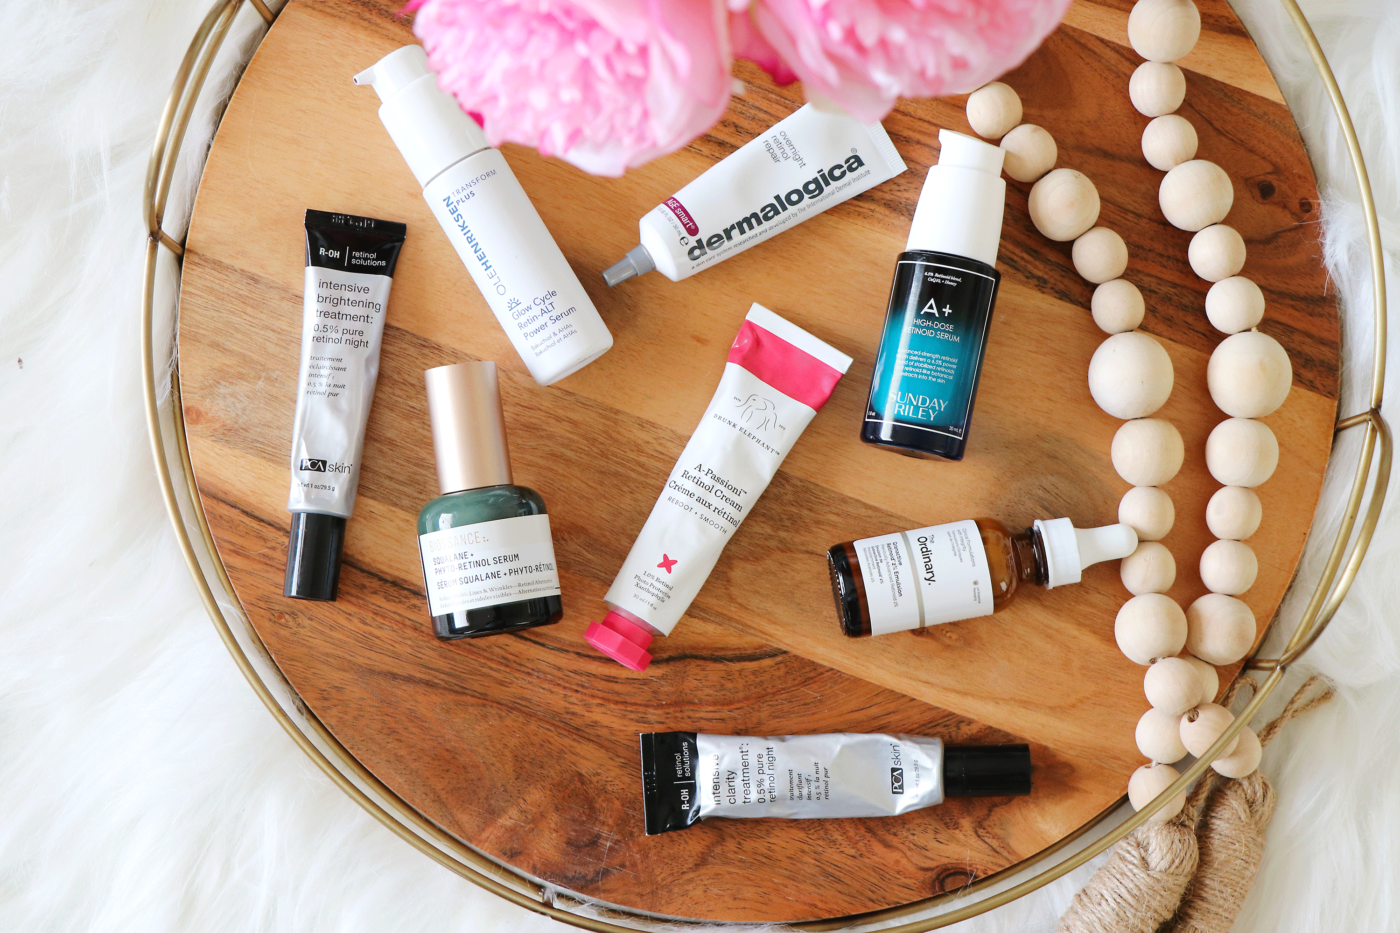 So you want to use a retinol but aren't sure where to start? Makeup Life and Love is sharing the rundown on why and how to use a retinol effectively. Click to see the how's and why's of retinol HERE!